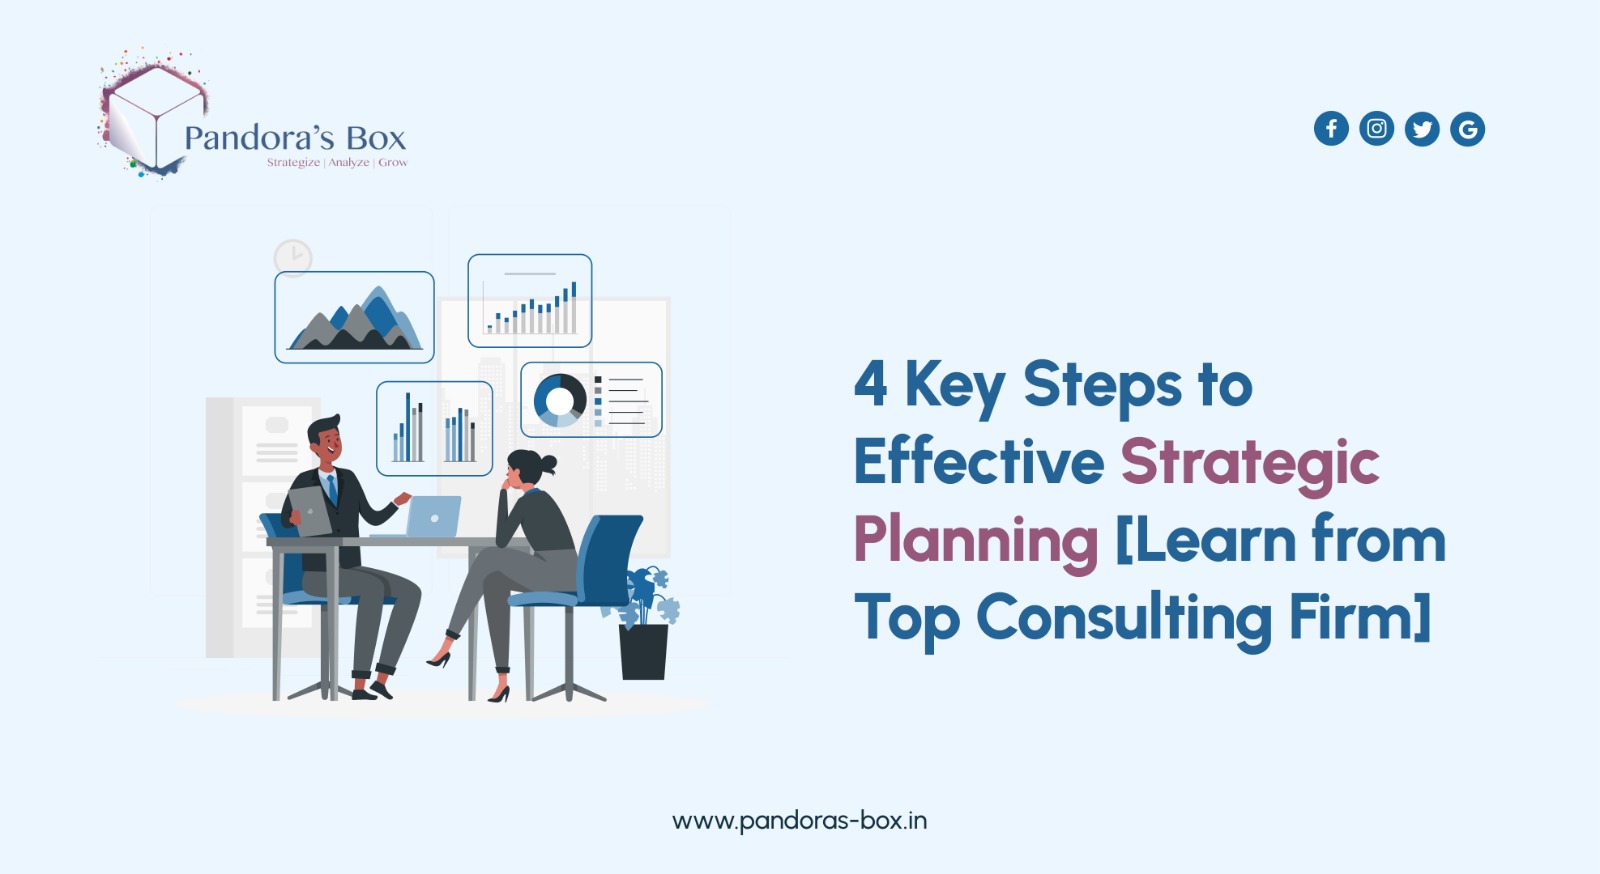 4 Key Steps to Effective Strategic Planning [Learn from Top Consulting Firm]